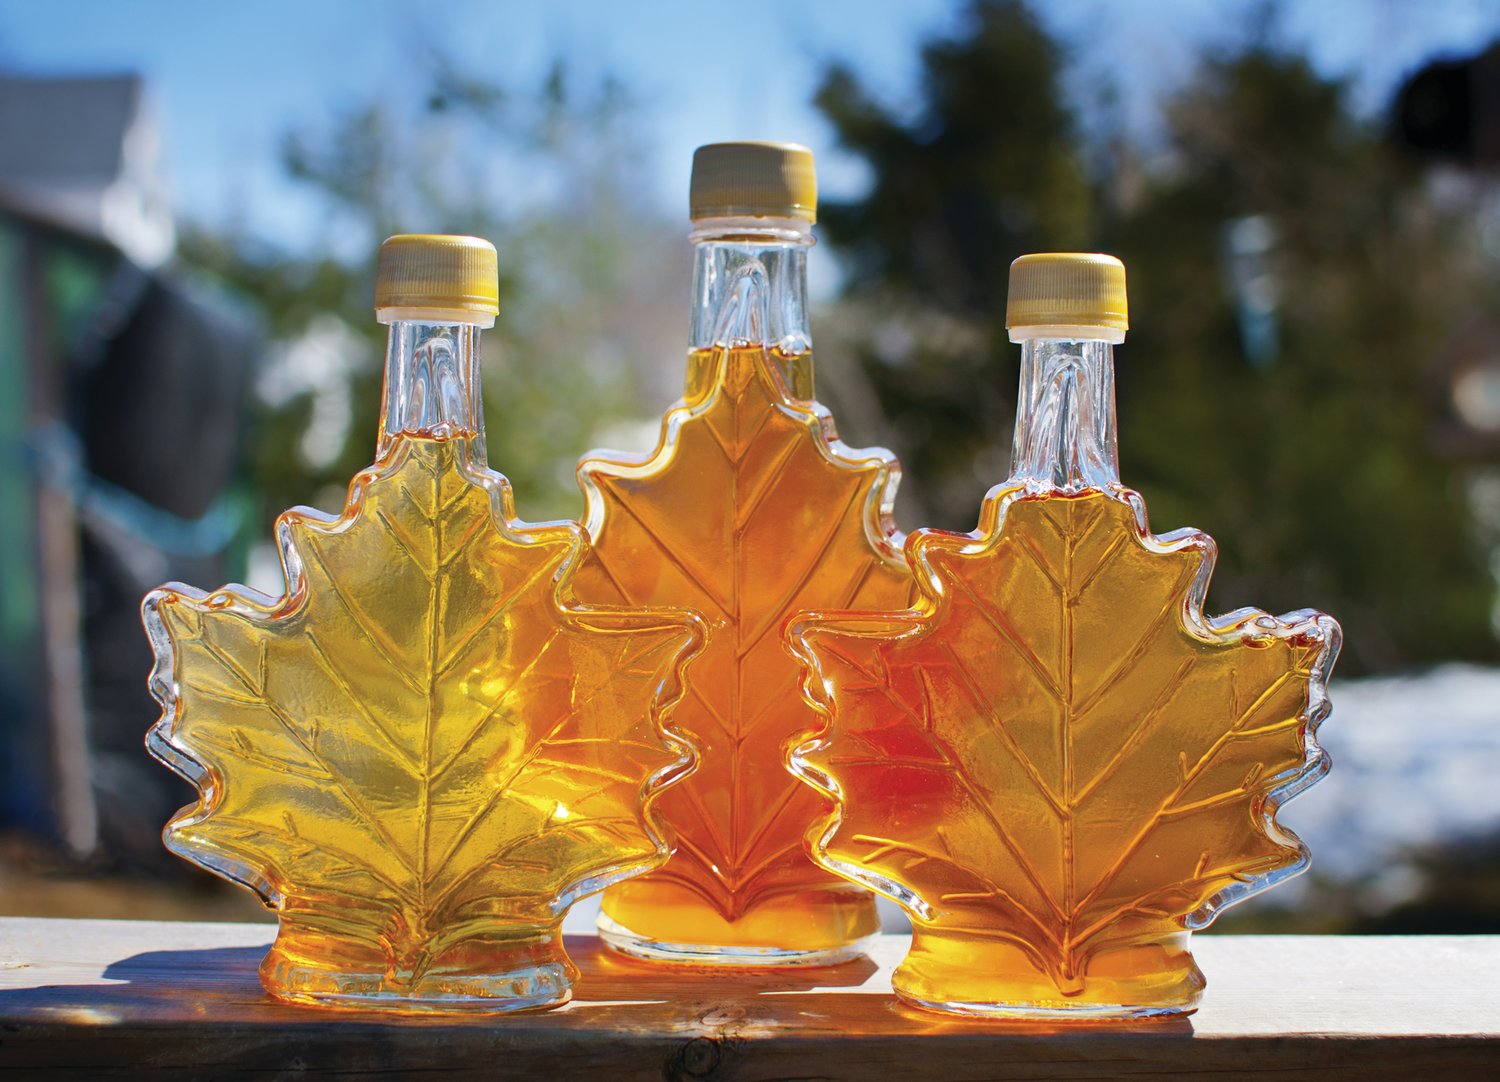 The public is invited to see how fresh, local, pure maple syrup is made at the Maple Syrup Celebration 2023 from 9 a.m. to 3 p.m. Saturdays and Sundays, March 18 through April 2, at Critz Farms.